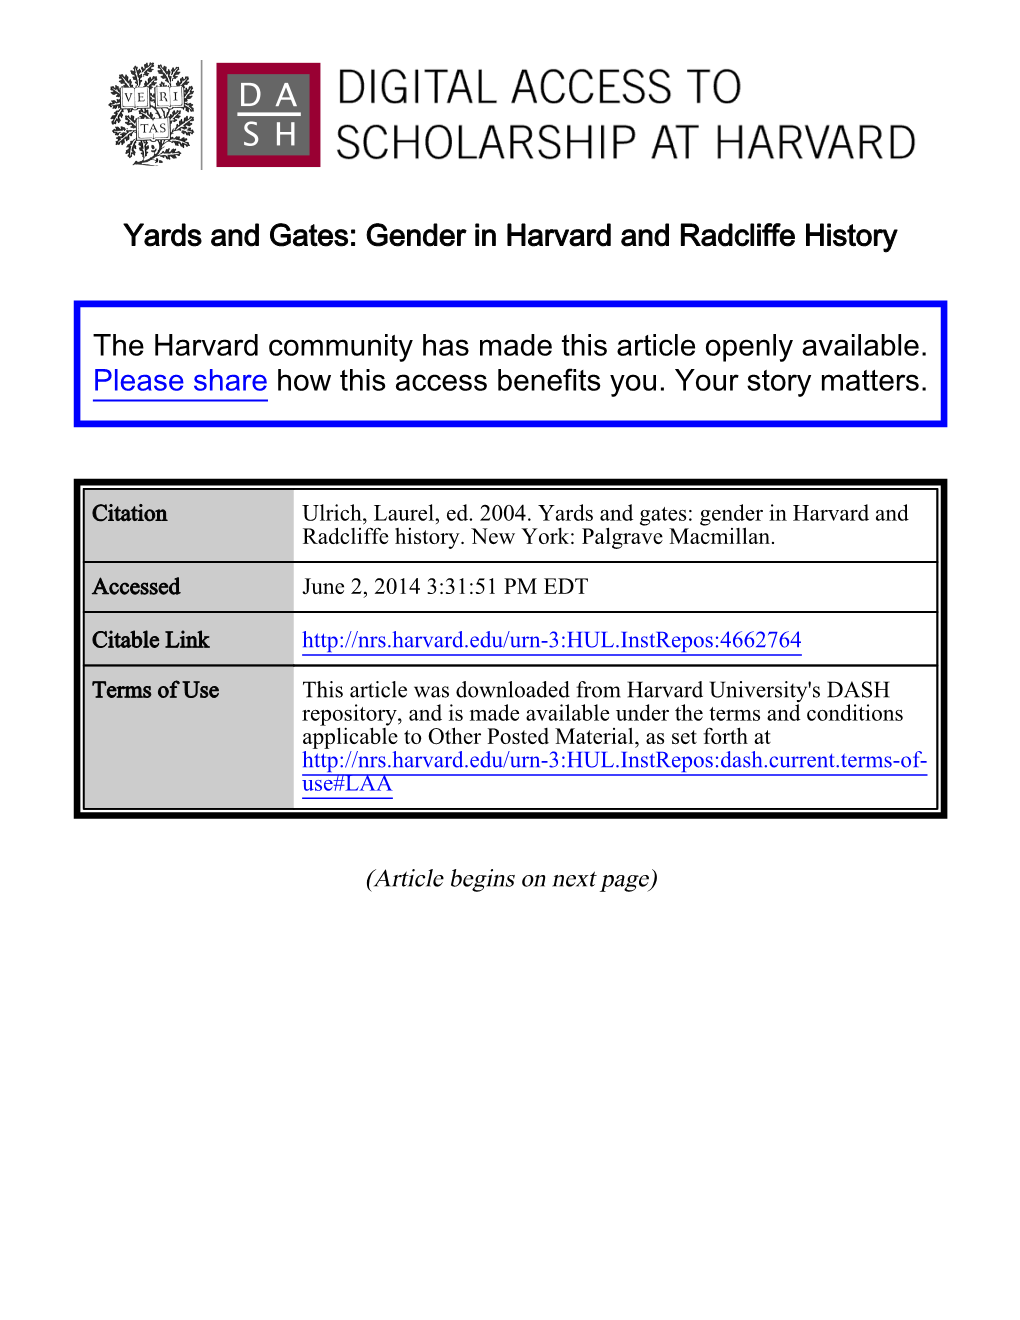 Gender in Harvard and Radcliffe History The